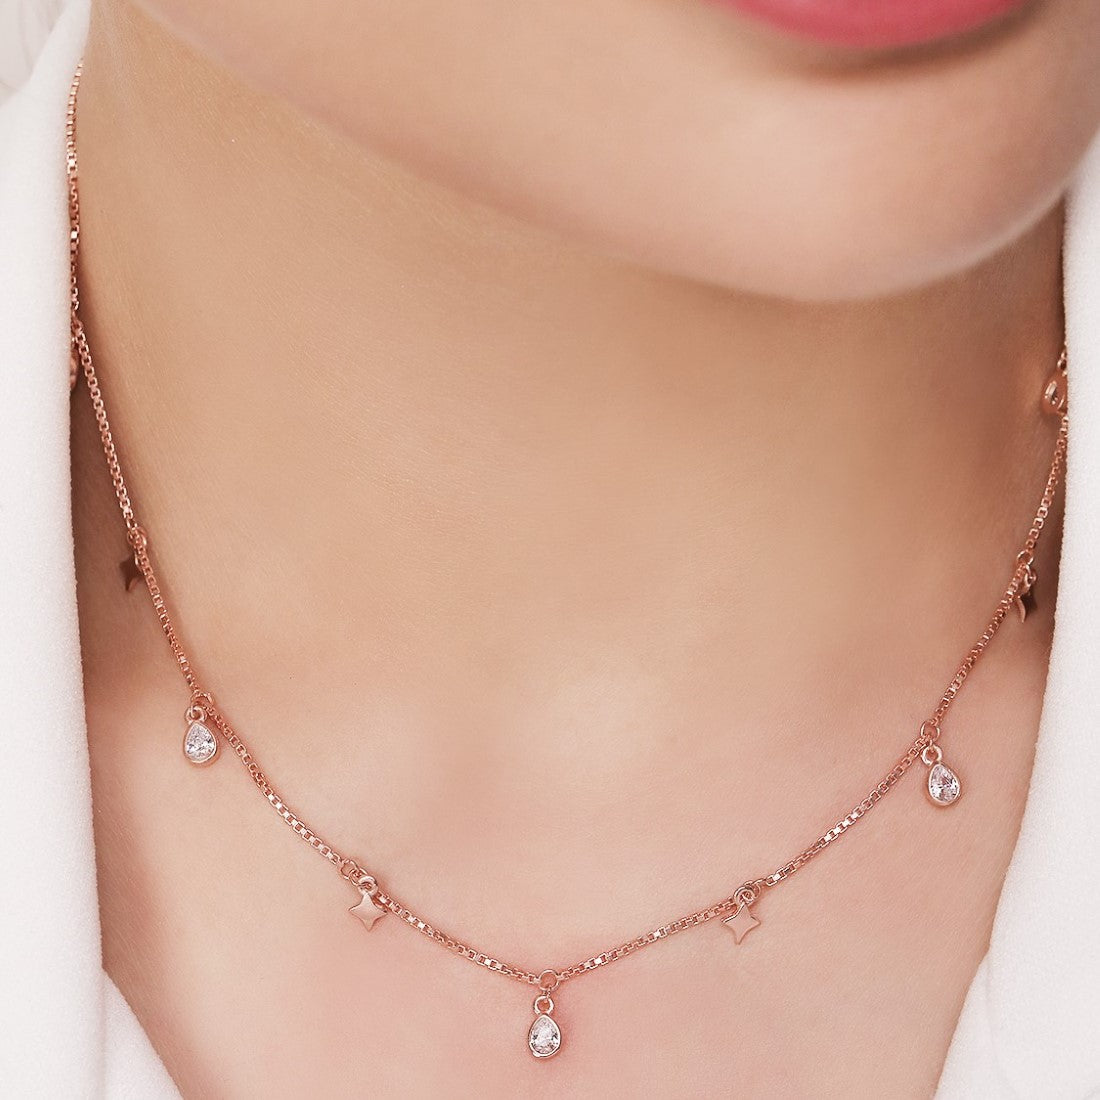 Starry Serenade Rose Gold-Plated 925 Sterling Silver Necklace